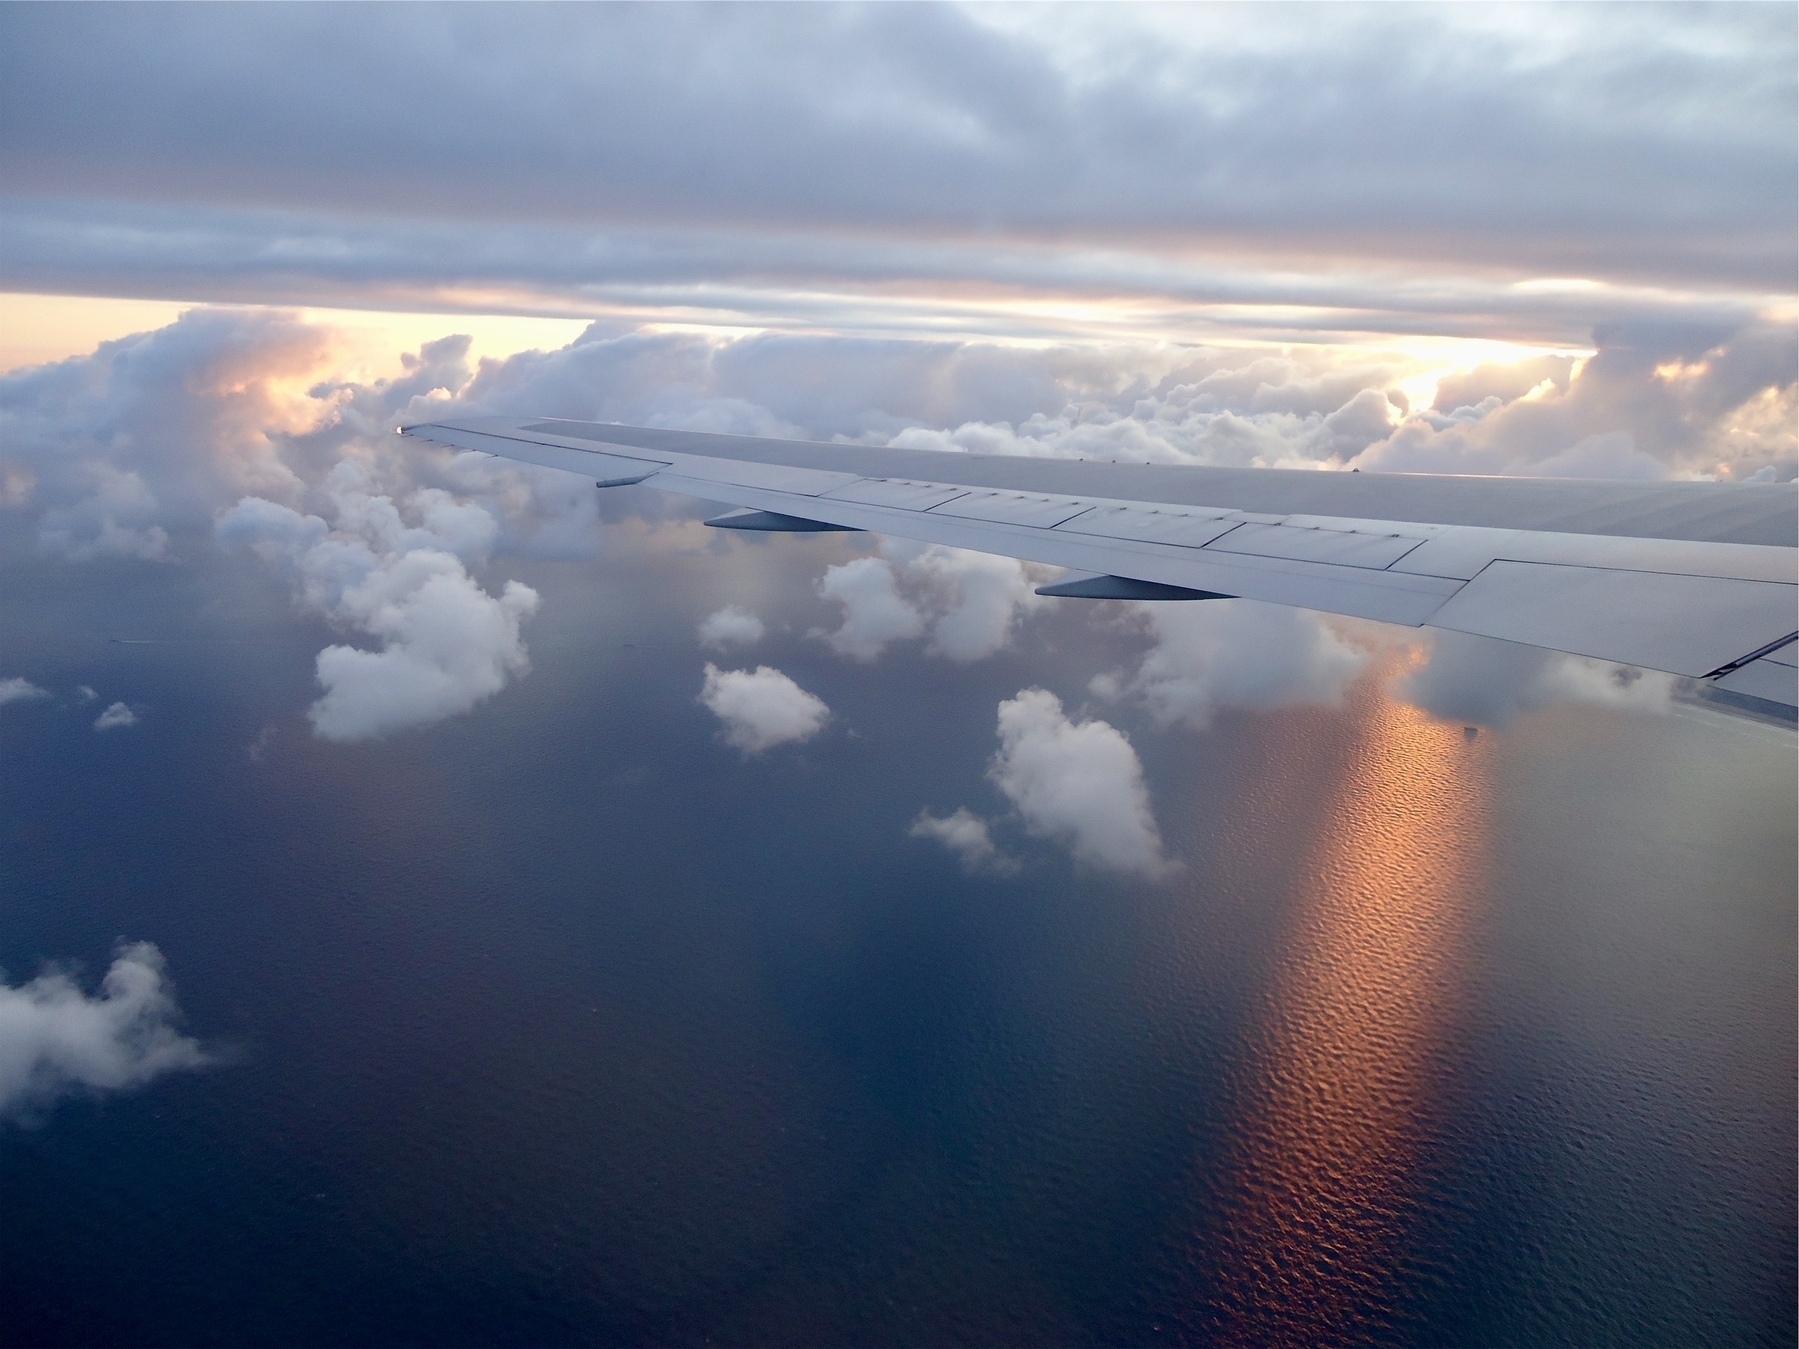 View of the sky and ocean, from an airplane; the ocean is a deep blue/purple below, with a hint of sunlight appearing on the water from behind the clouds, while the white wing of the plan is across the middle of the image.